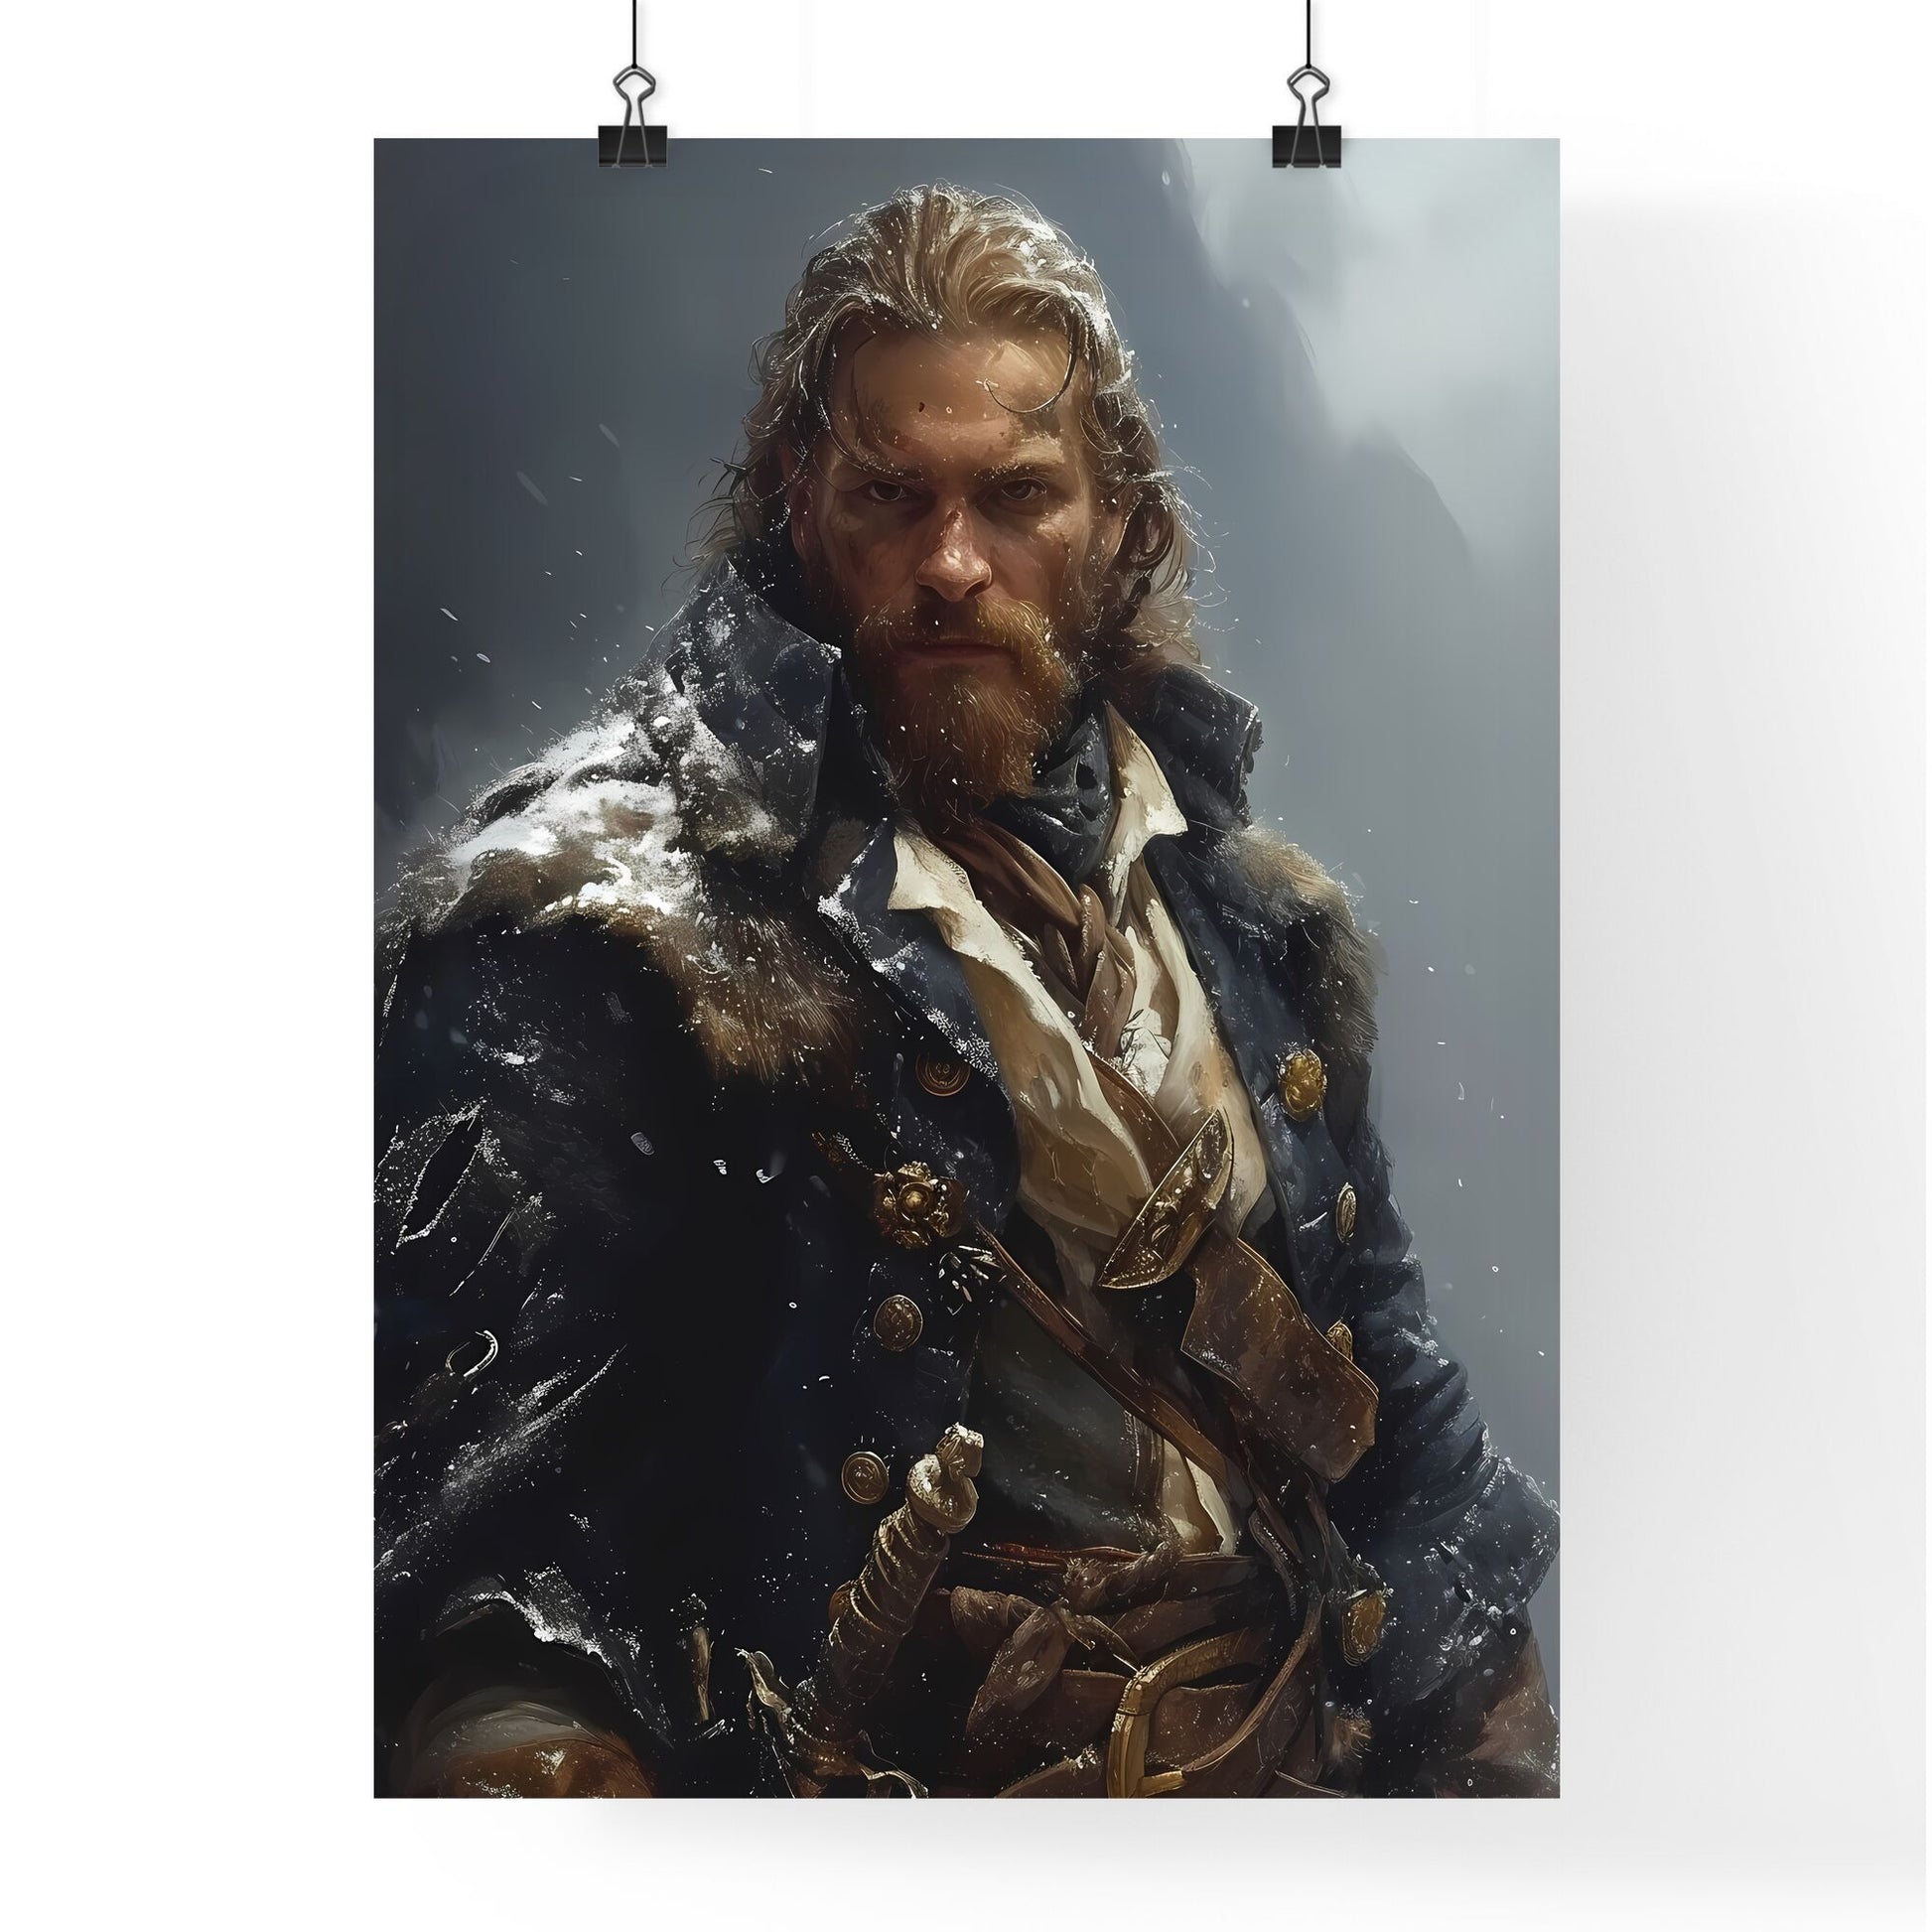 Red bearded man falls - Art print of a man in a pirate garment Default Title